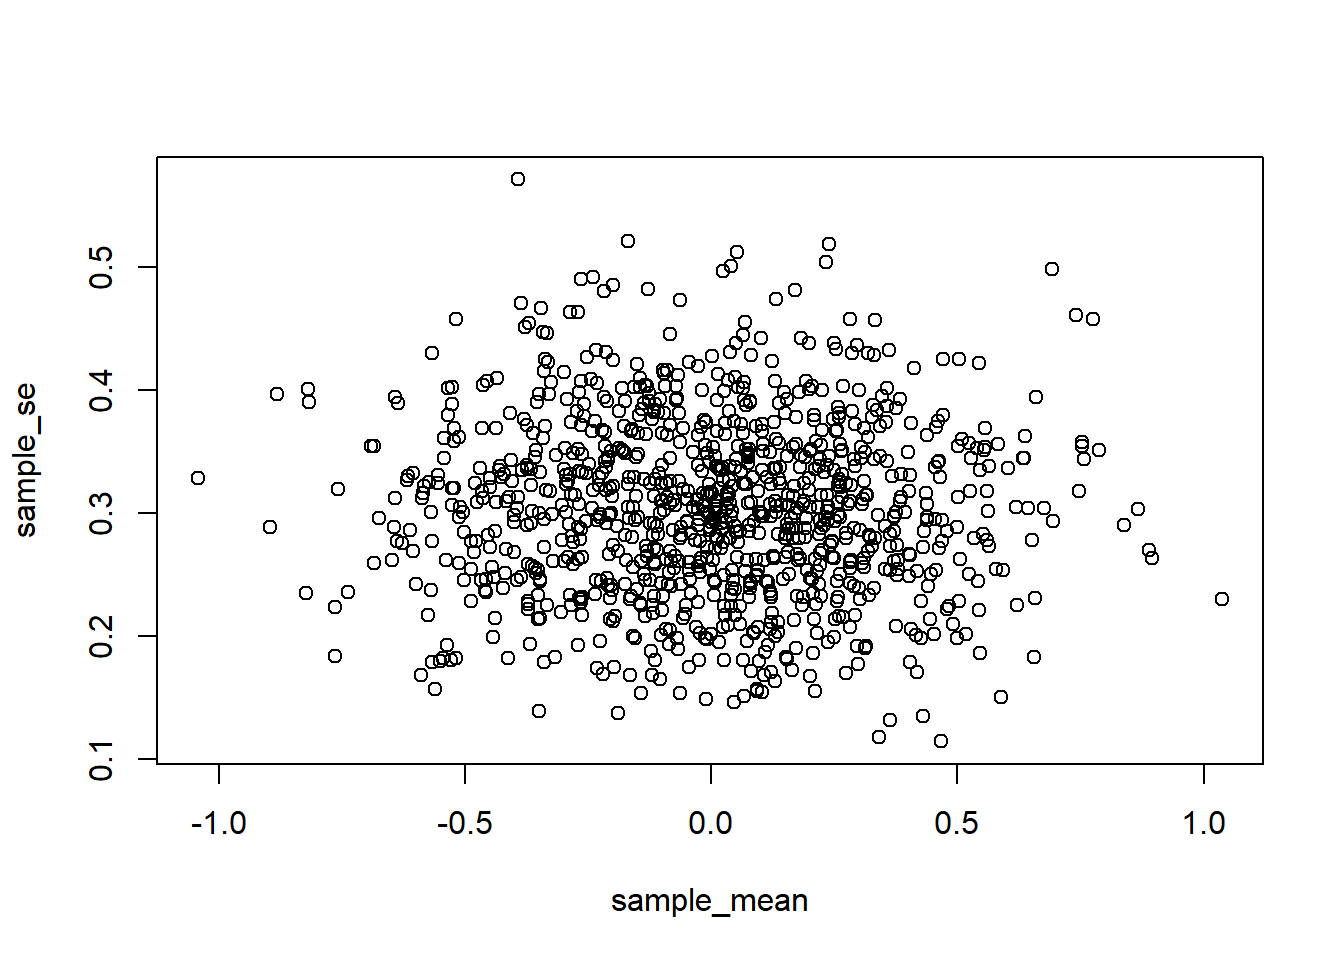 A scatterplot with sample mean on the x-axis, and standard error of the mean on the y-axis